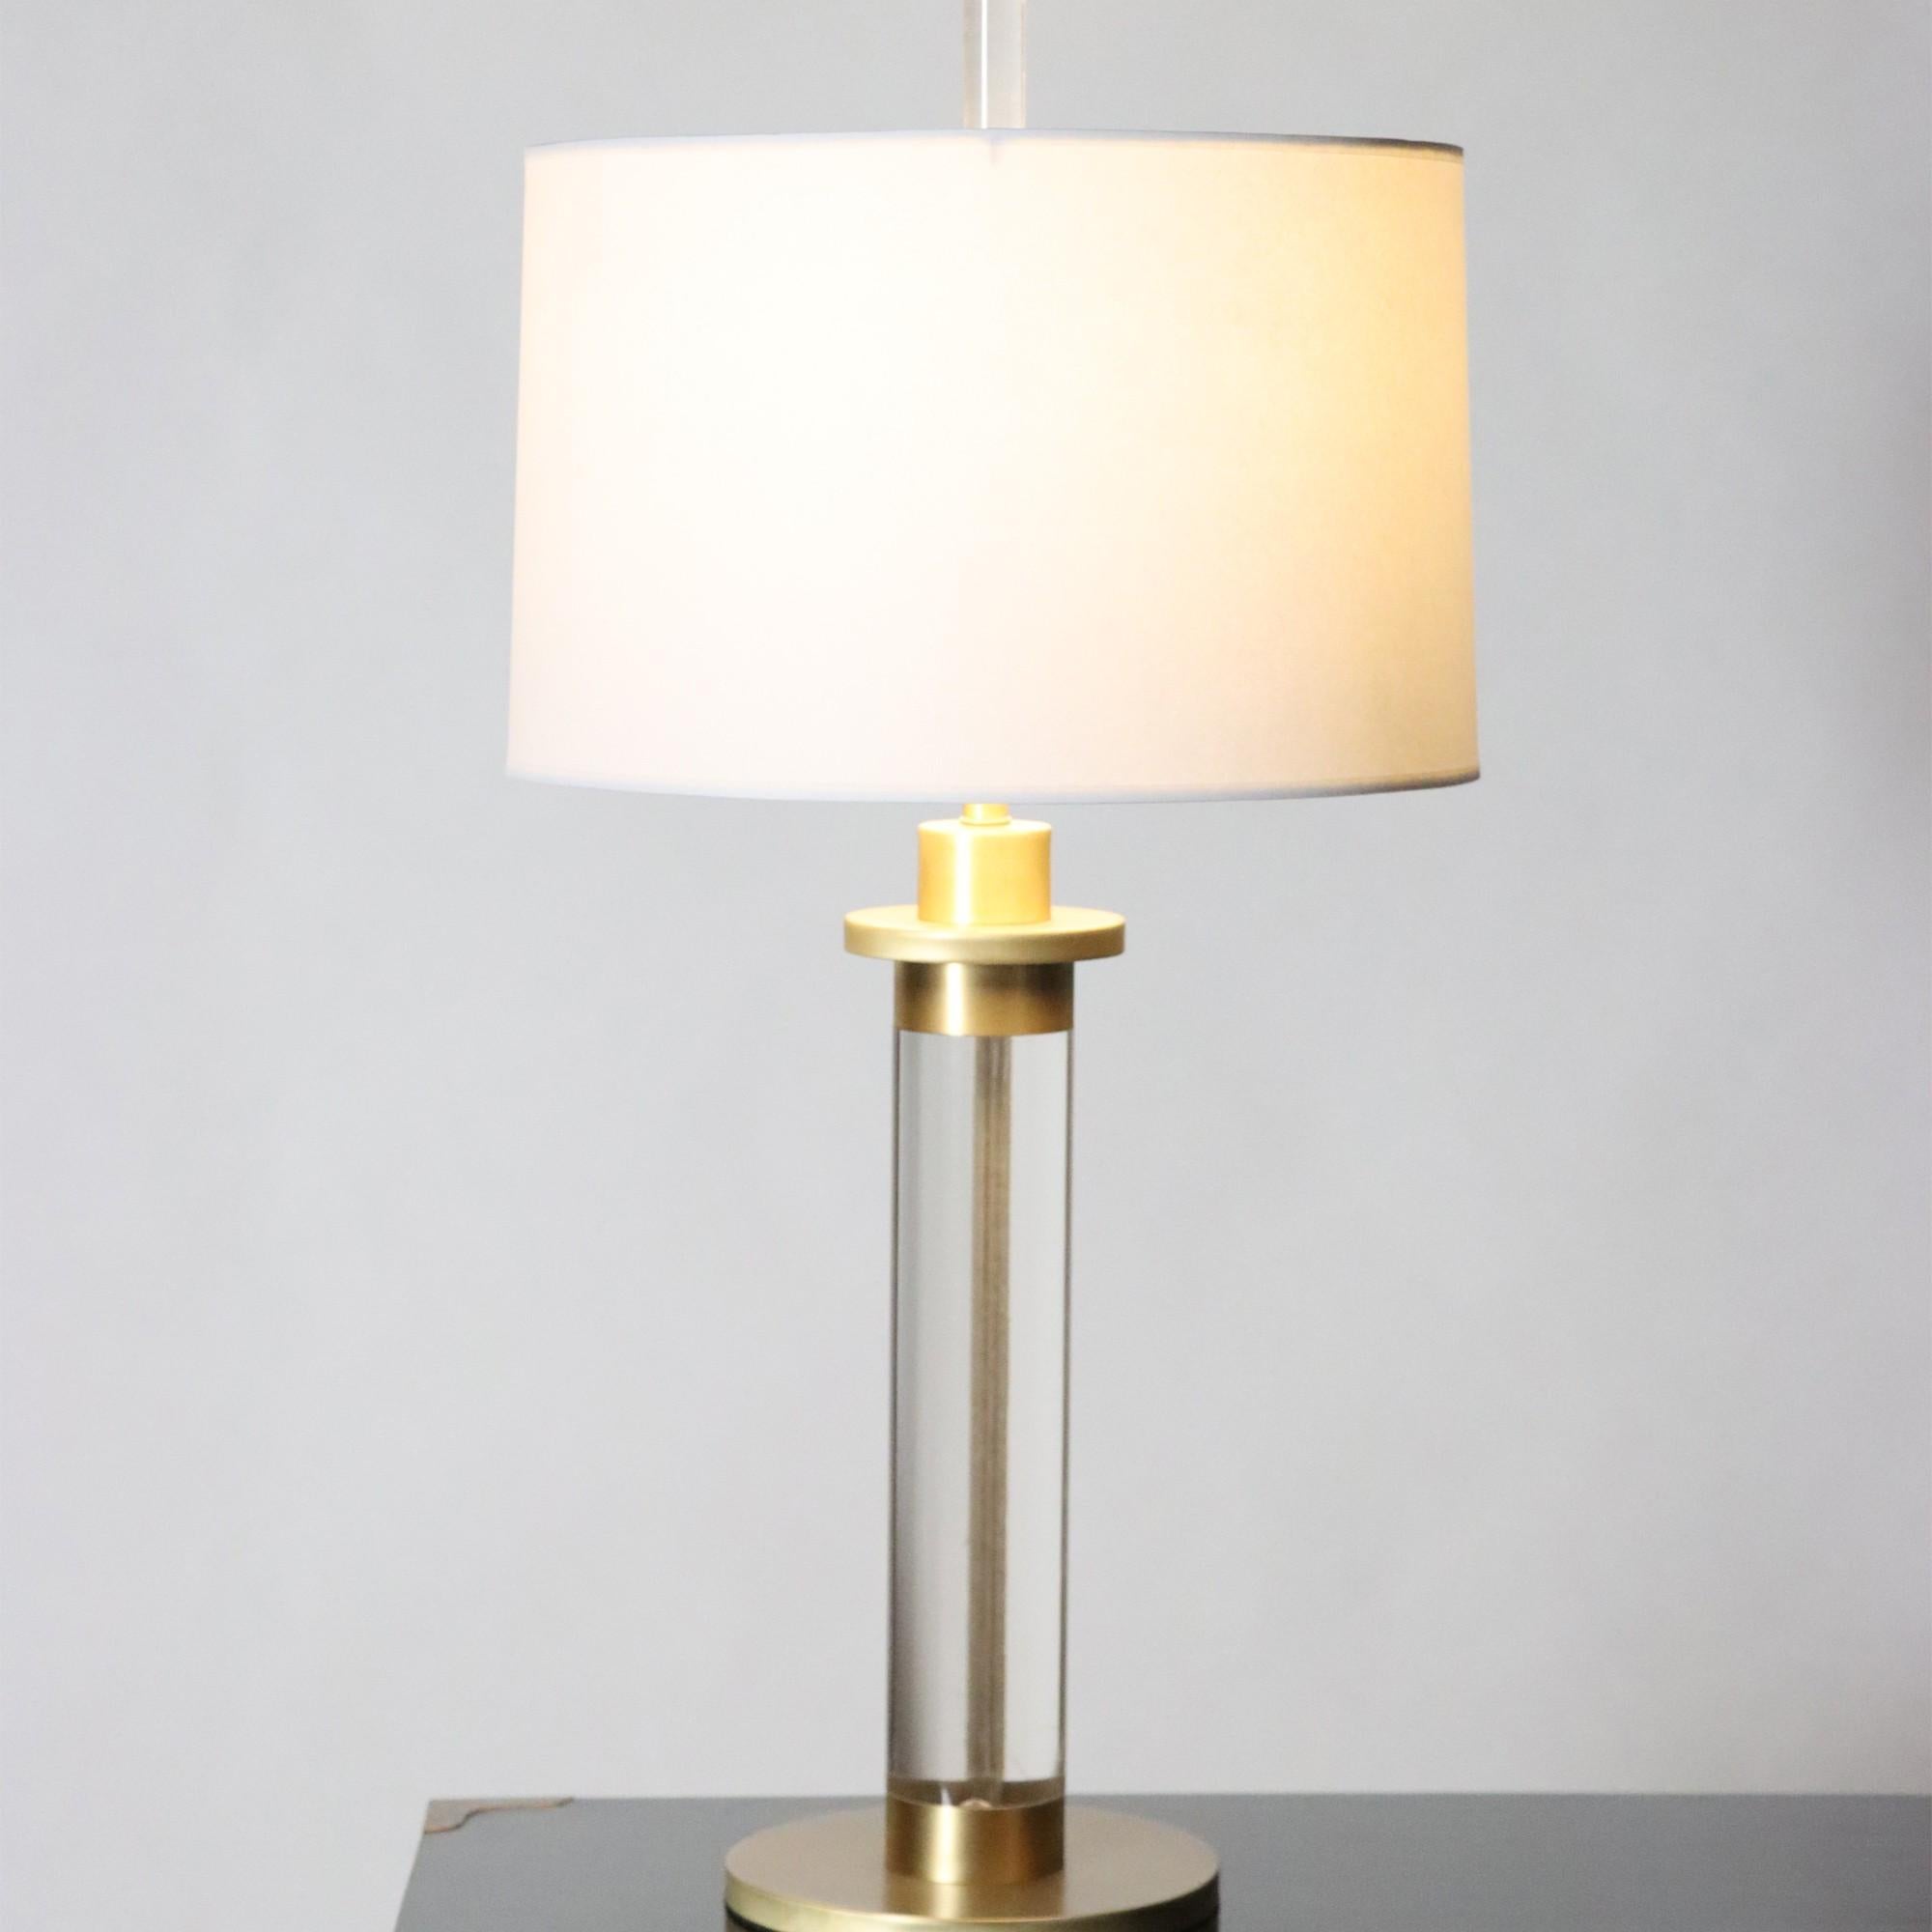 Pair of Modern Lucite Brass Column Table Lamps, circa 1950 For Sale 3